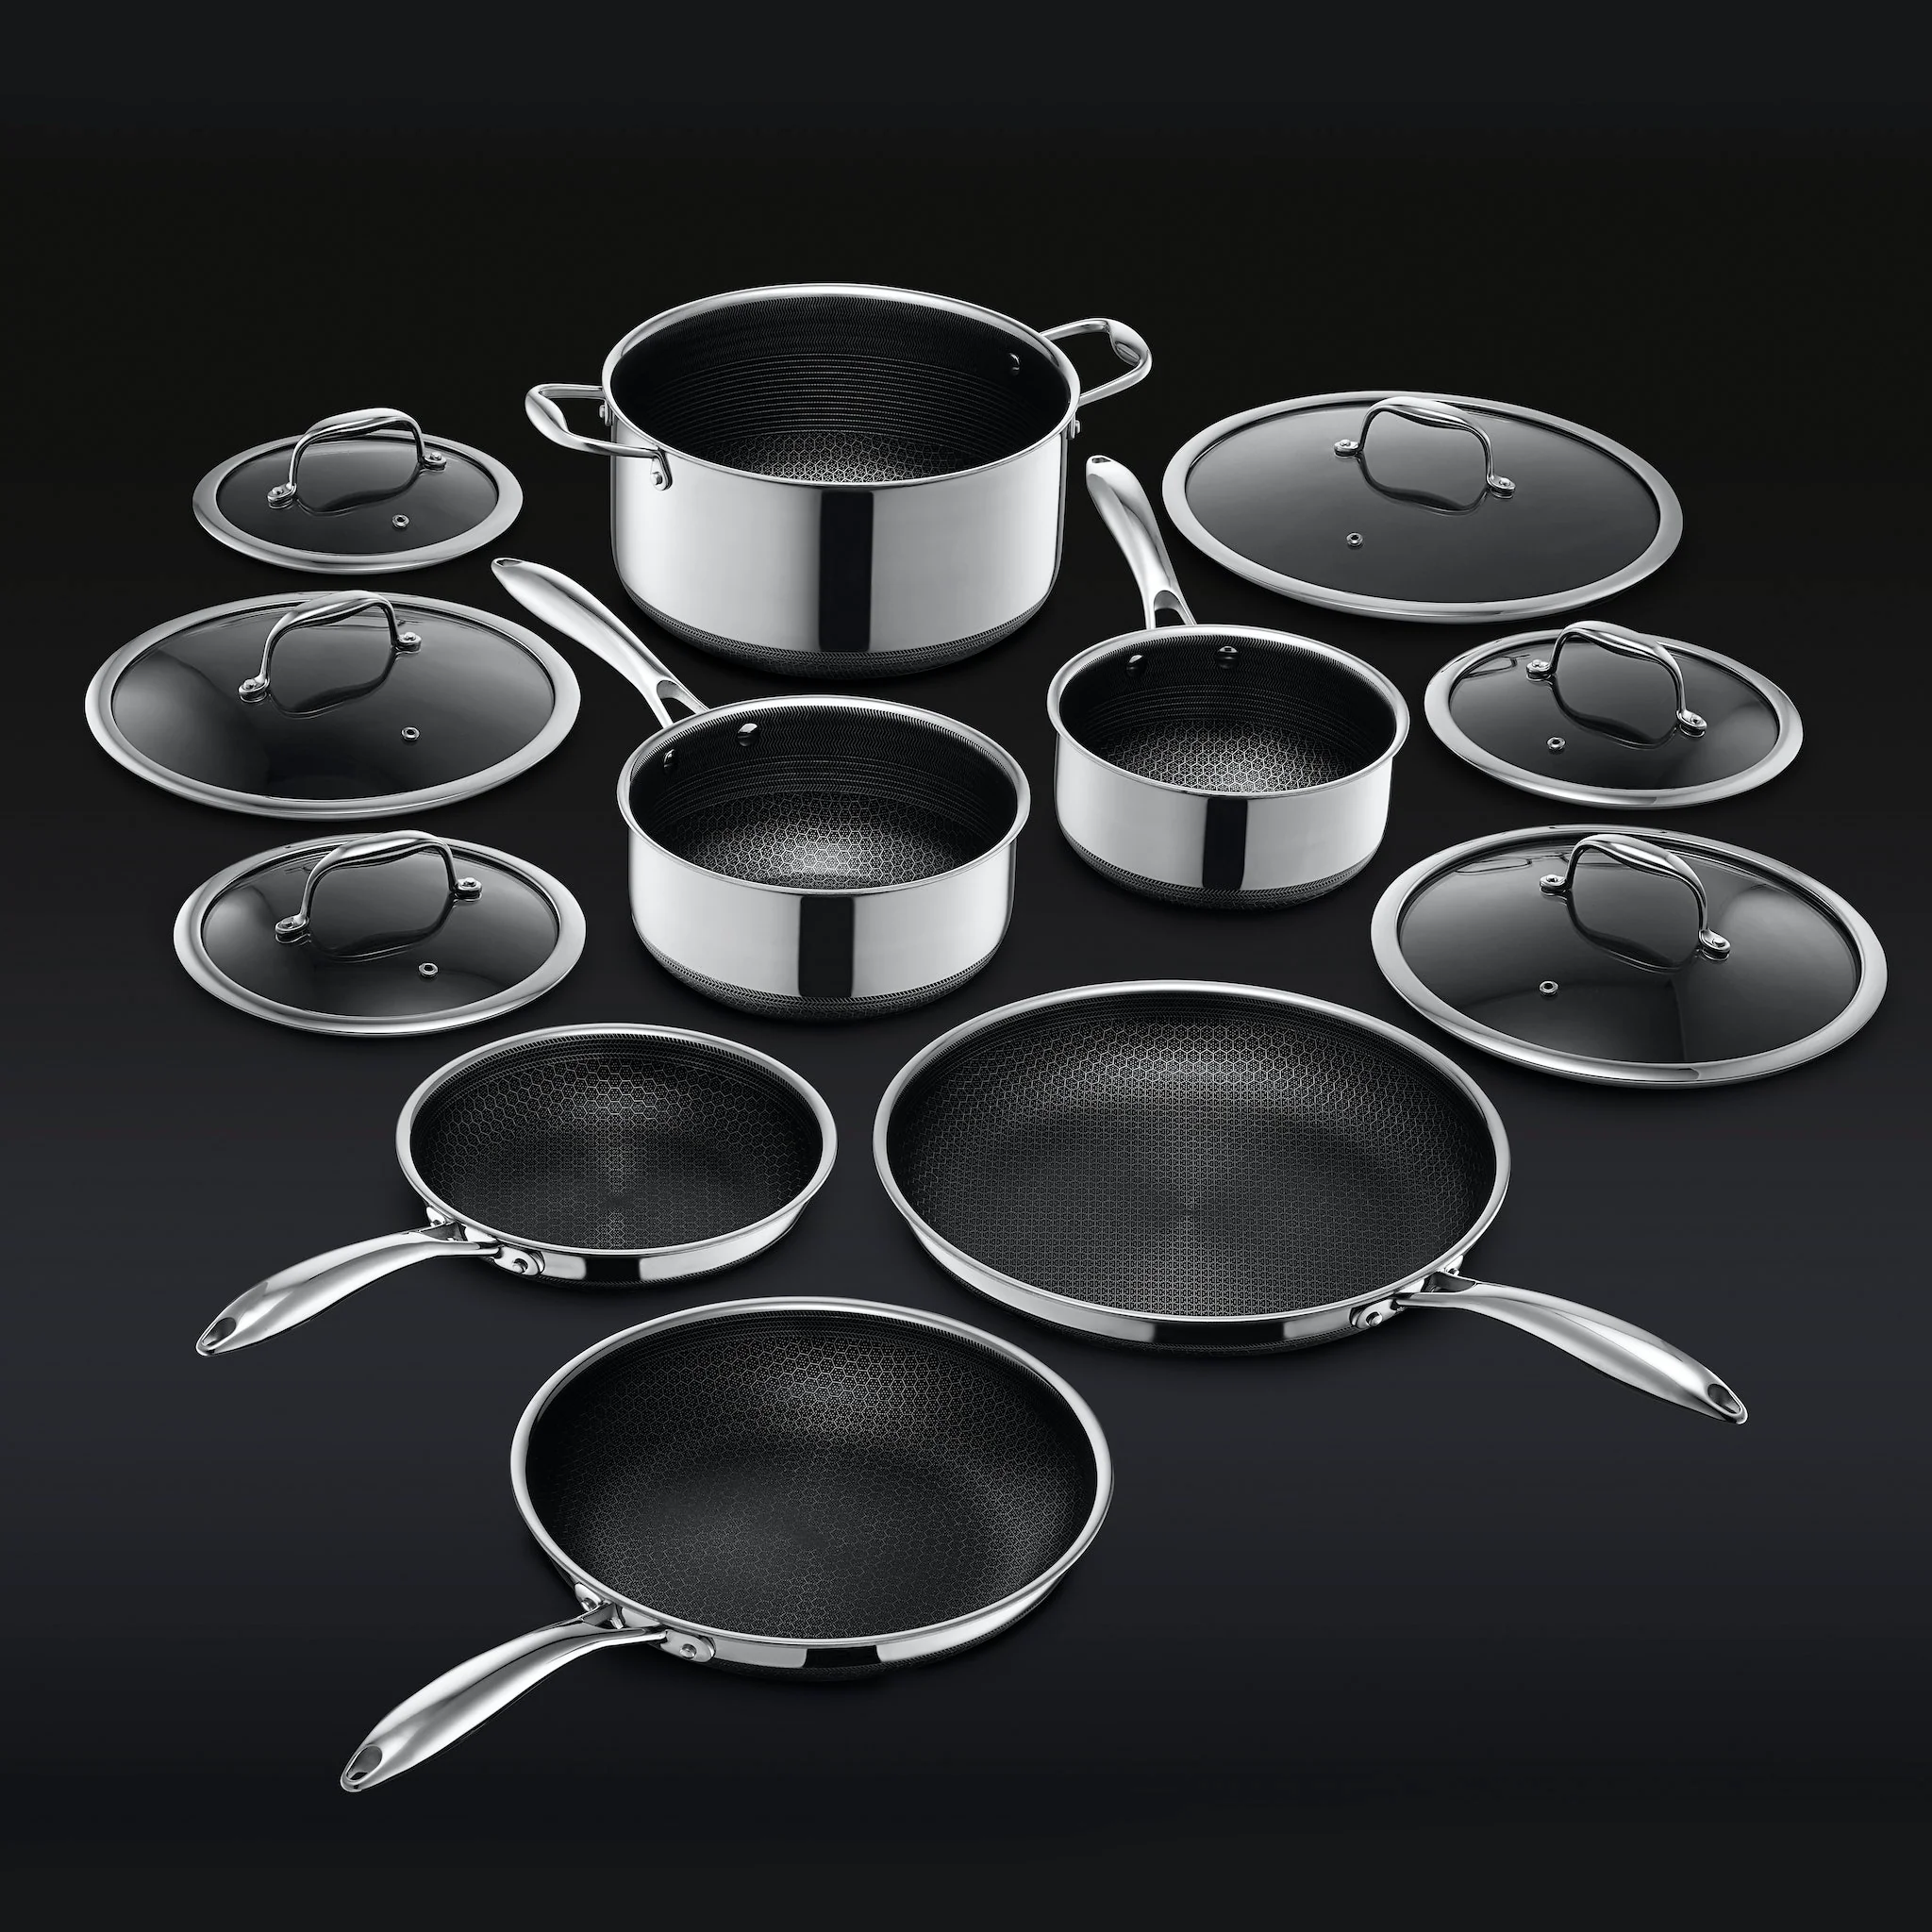 Hexclad 3 Quart Hybrid Stainless Steel Pot Saucepan With Glass Lid - Easy  To Clean : Target